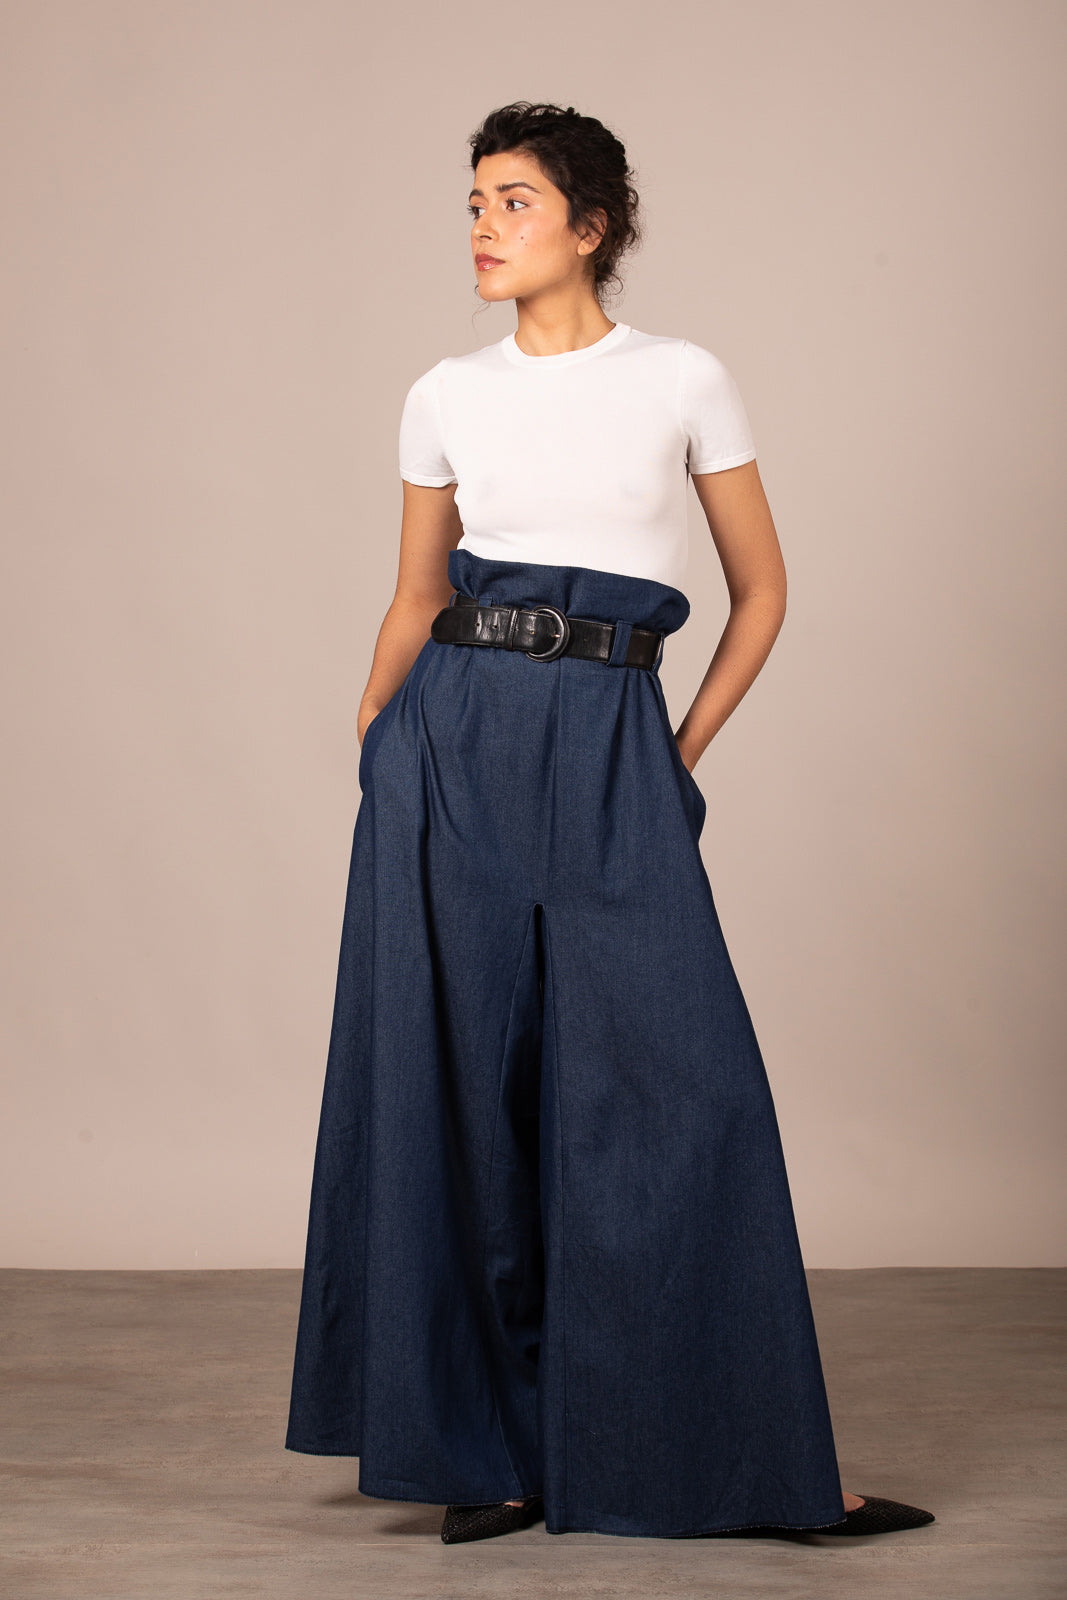 Oversized Trousers